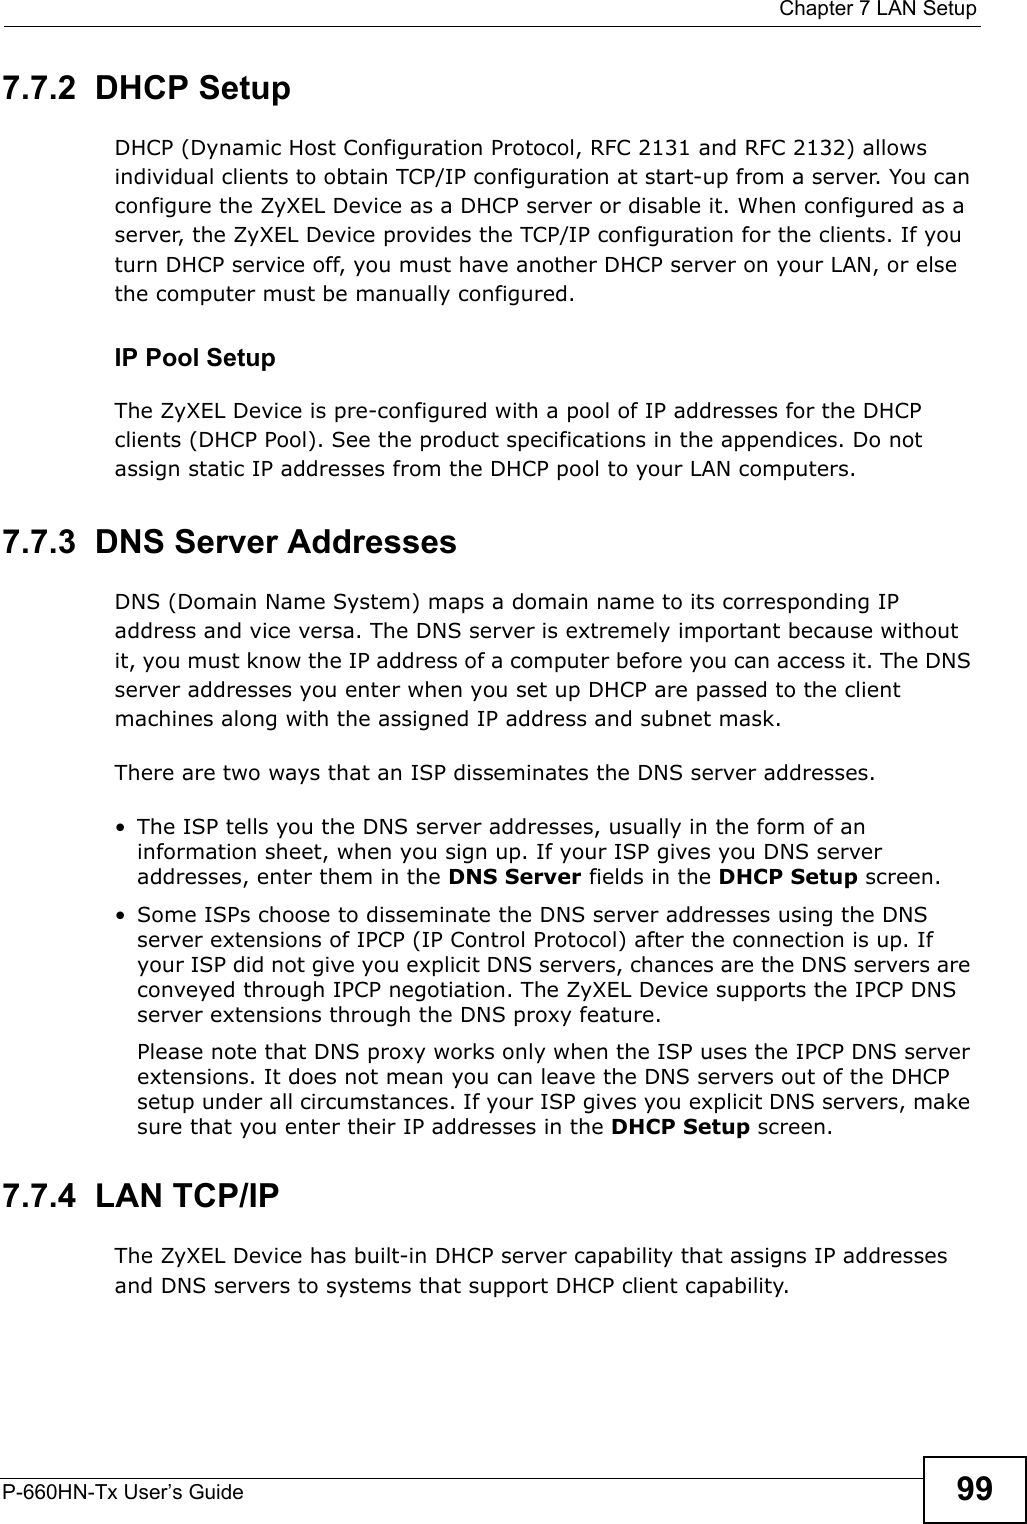  Chapter 7 LAN SetupP-660HN-Tx User’s Guide 997.7.2  DHCP SetupDHCP (Dynamic Host Configuration Protocol, RFC 2131 and RFC 2132) allows individual clients to obtain TCP/IP configuration at start-up from a server. You can configure the ZyXEL Device as a DHCP server or disable it. When configured as a server, the ZyXEL Device provides the TCP/IP configuration for the clients. If you turn DHCP service off, you must have another DHCP server on your LAN, or else the computer must be manually configured. IP Pool SetupThe ZyXEL Device is pre-configured with a pool of IP addresses for the DHCP clients (DHCP Pool). See the product specifications in the appendices. Do not assign static IP addresses from the DHCP pool to your LAN computers.7.7.3  DNS Server Addresses DNS (Domain Name System) maps a domain name to its corresponding IP address and vice versa. The DNS server is extremely important because without it, you must know the IP address of a computer before you can access it. The DNS server addresses you enter when you set up DHCP are passed to the client machines along with the assigned IP address and subnet mask.There are two ways that an ISP disseminates the DNS server addresses. • The ISP tells you the DNS server addresses, usually in the form of an information sheet, when you sign up. If your ISP gives you DNS server addresses, enter them in the DNS Server fields in the DHCP Setup screen.• Some ISPs choose to disseminate the DNS server addresses using the DNS server extensions of IPCP (IP Control Protocol) after the connection is up. If your ISP did not give you explicit DNS servers, chances are the DNS servers are conveyed through IPCP negotiation. The ZyXEL Device supports the IPCP DNS server extensions through the DNS proxy feature.Please note that DNS proxy works only when the ISP uses the IPCP DNS server extensions. It does not mean you can leave the DNS servers out of the DHCP setup under all circumstances. If your ISP gives you explicit DNS servers, make sure that you enter their IP addresses in the DHCP Setup screen.7.7.4  LAN TCP/IP The ZyXEL Device has built-in DHCP server capability that assigns IP addresses and DNS servers to systems that support DHCP client capability.